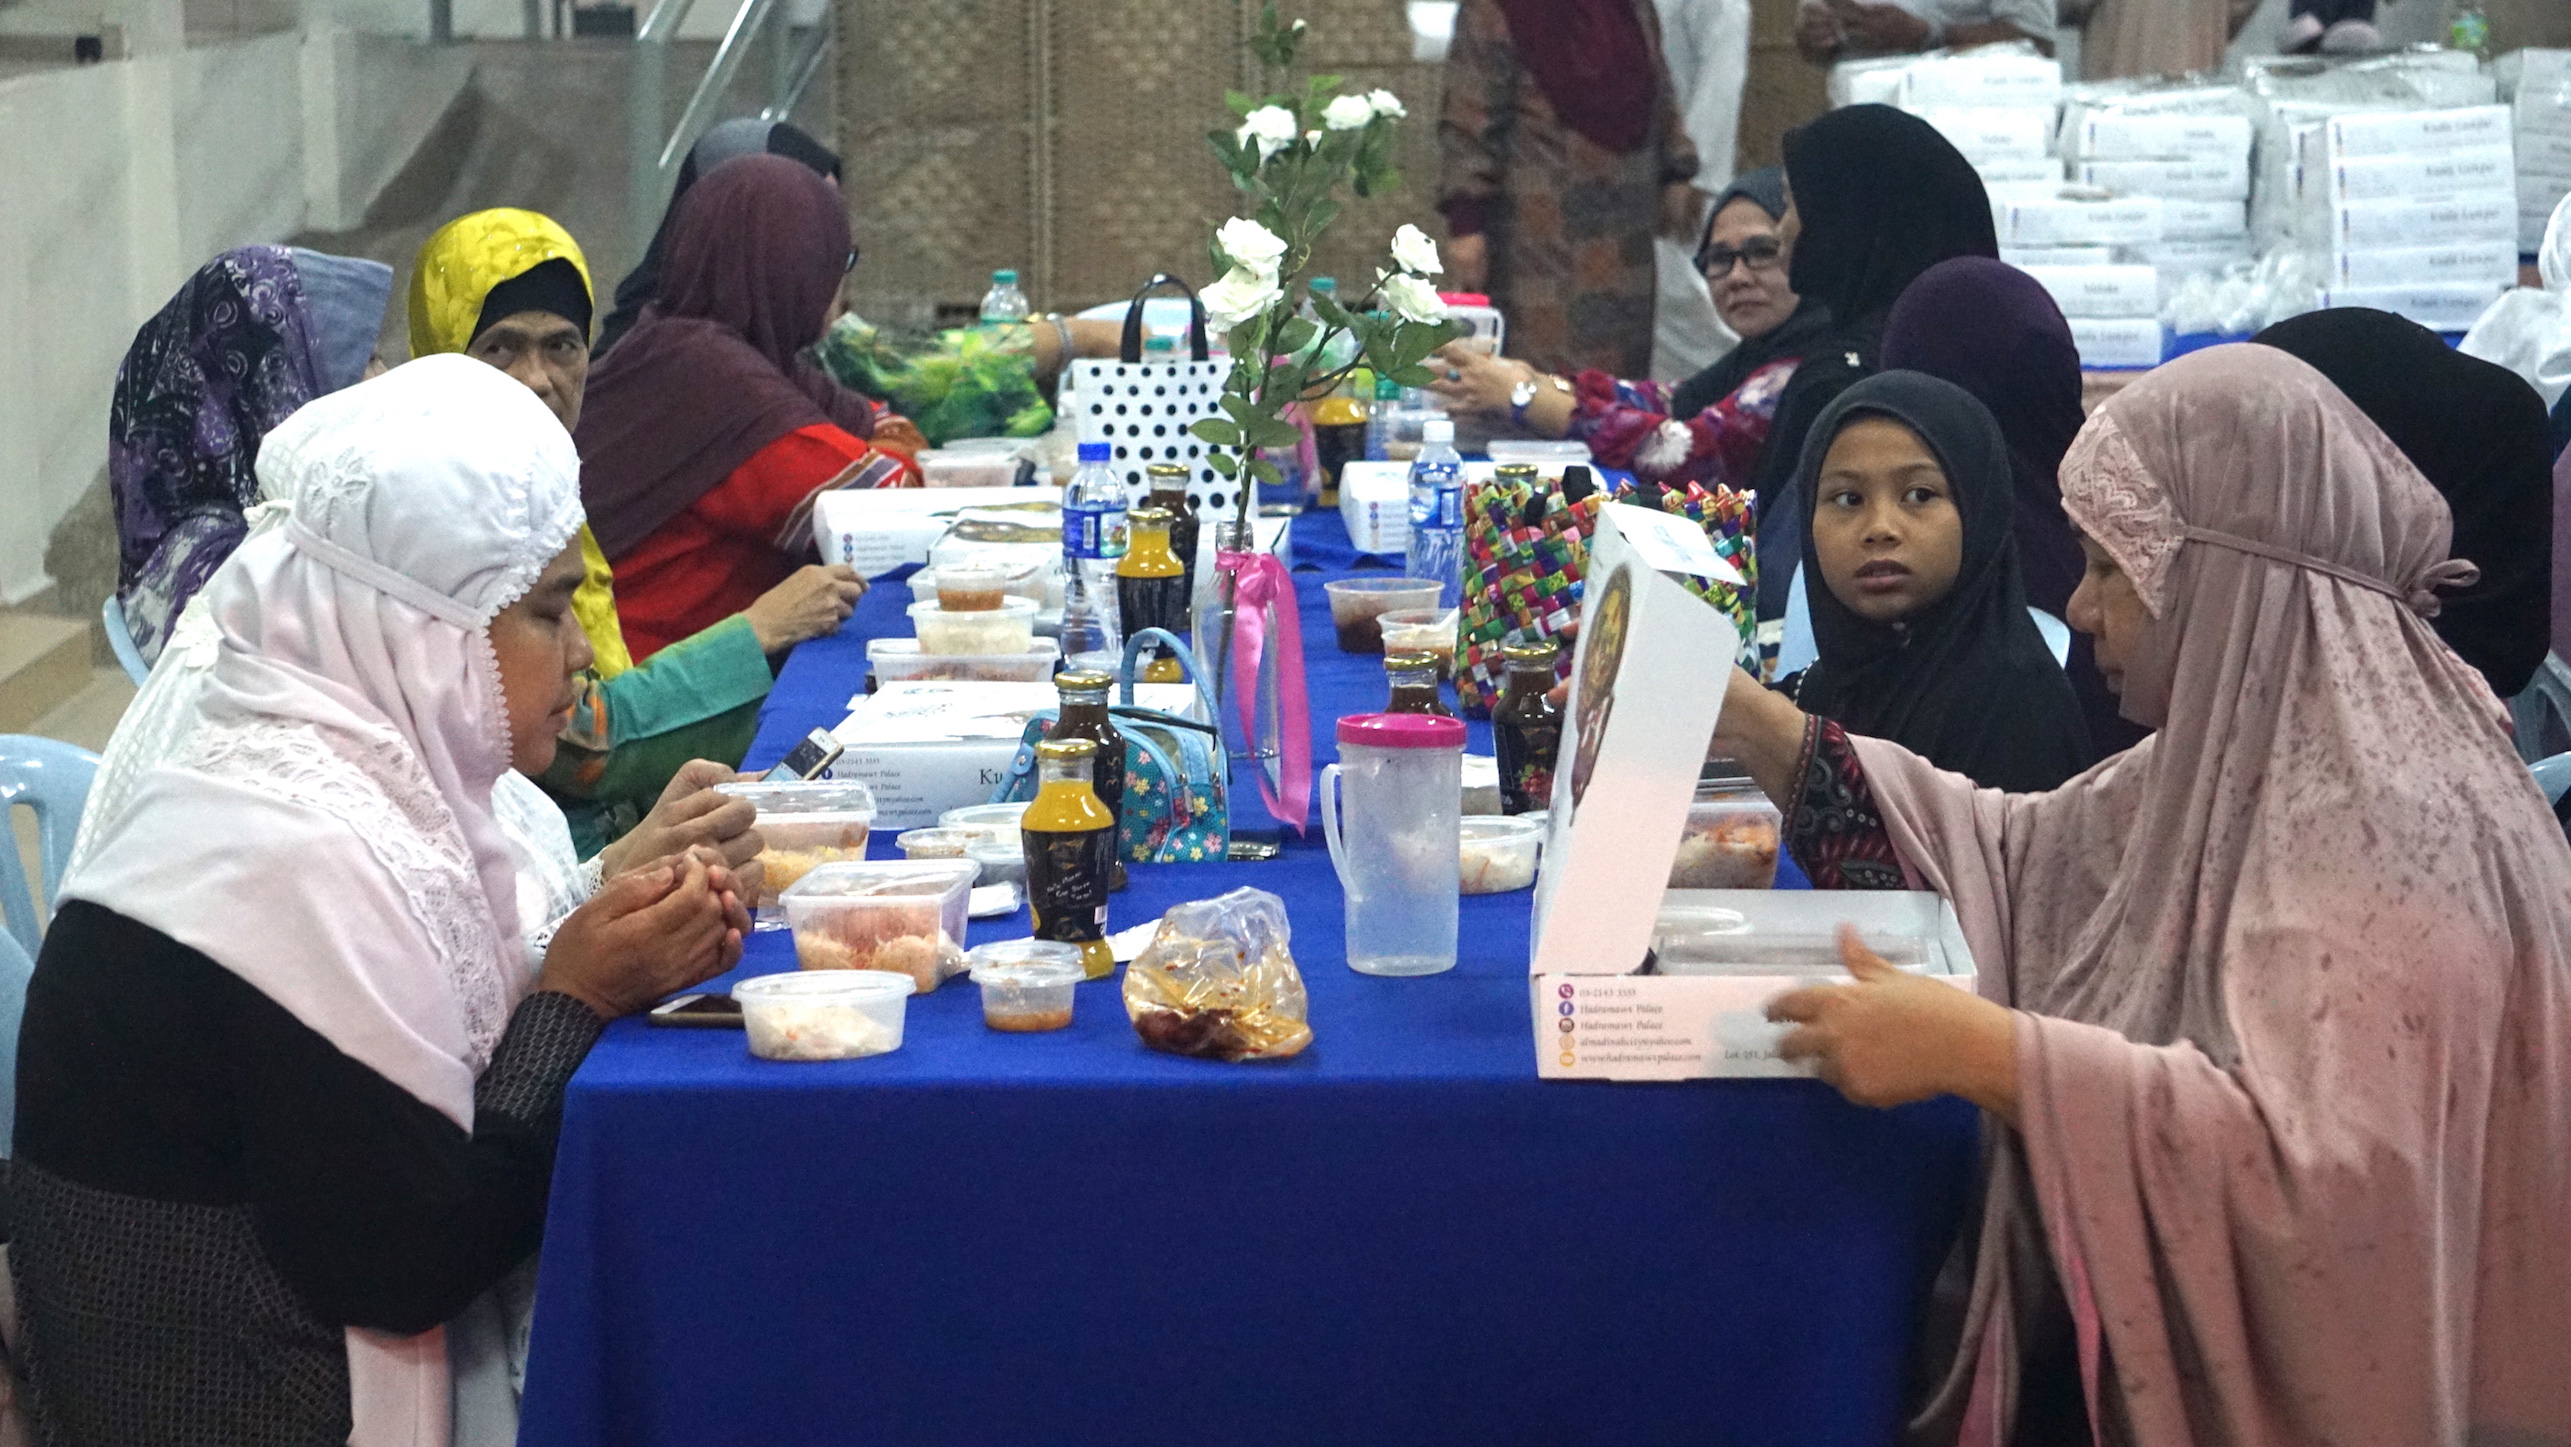 Muslims about to eat their iftar meal which was distributed by Kuwait's embassy in Malaysia as part of a charity project to provide more than 5,300 iftar meals to mosques, orphanages, schools and other places